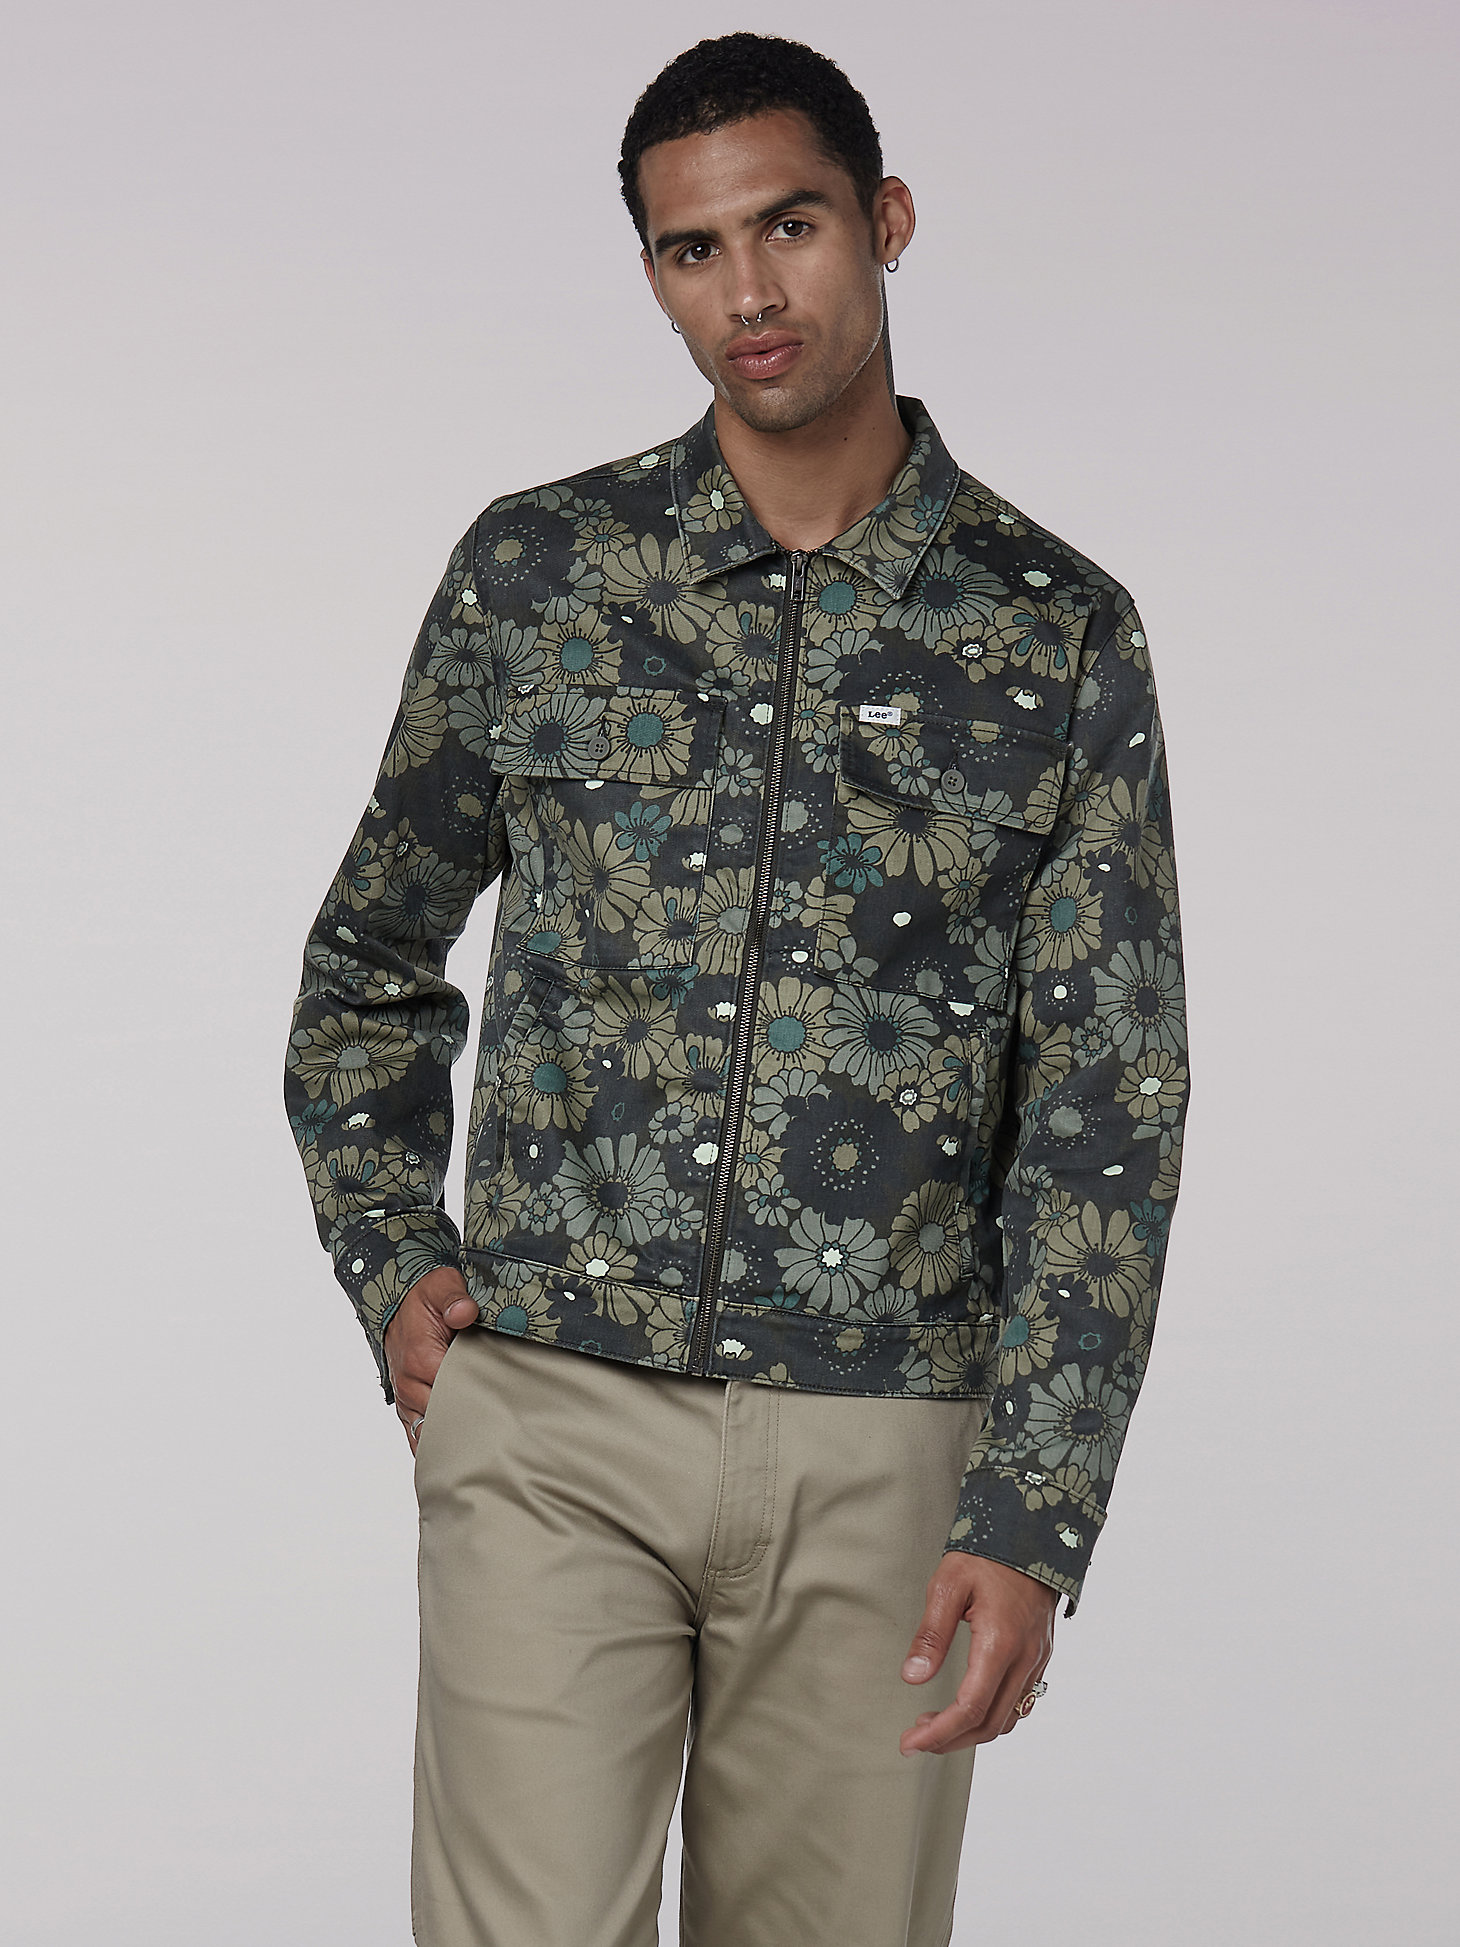 Men's Heritage Chetopa Boxy Jacket in Green Floral main view